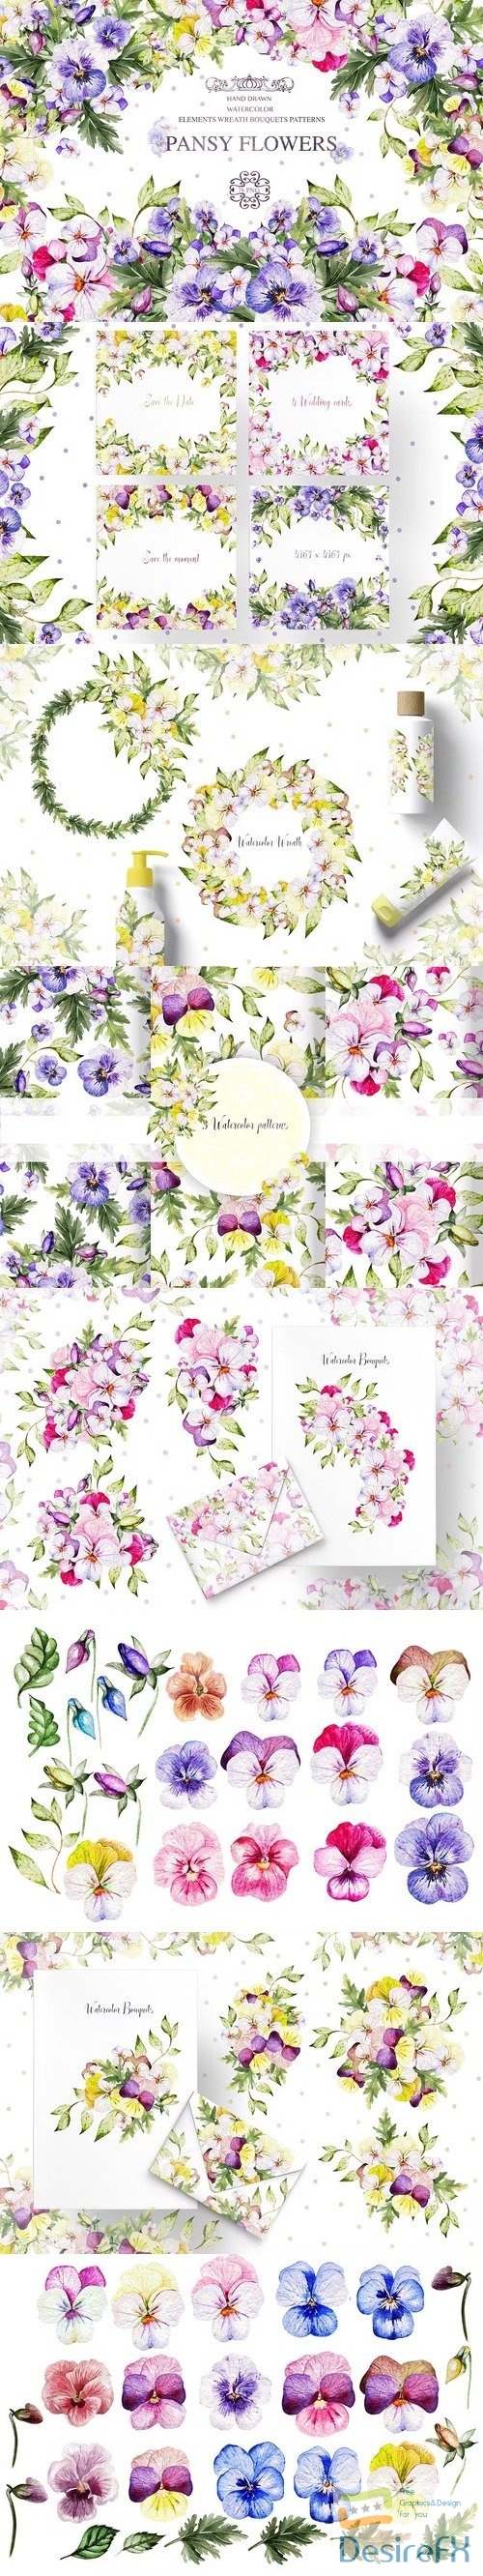 Watercolor PANSY FLOWERS